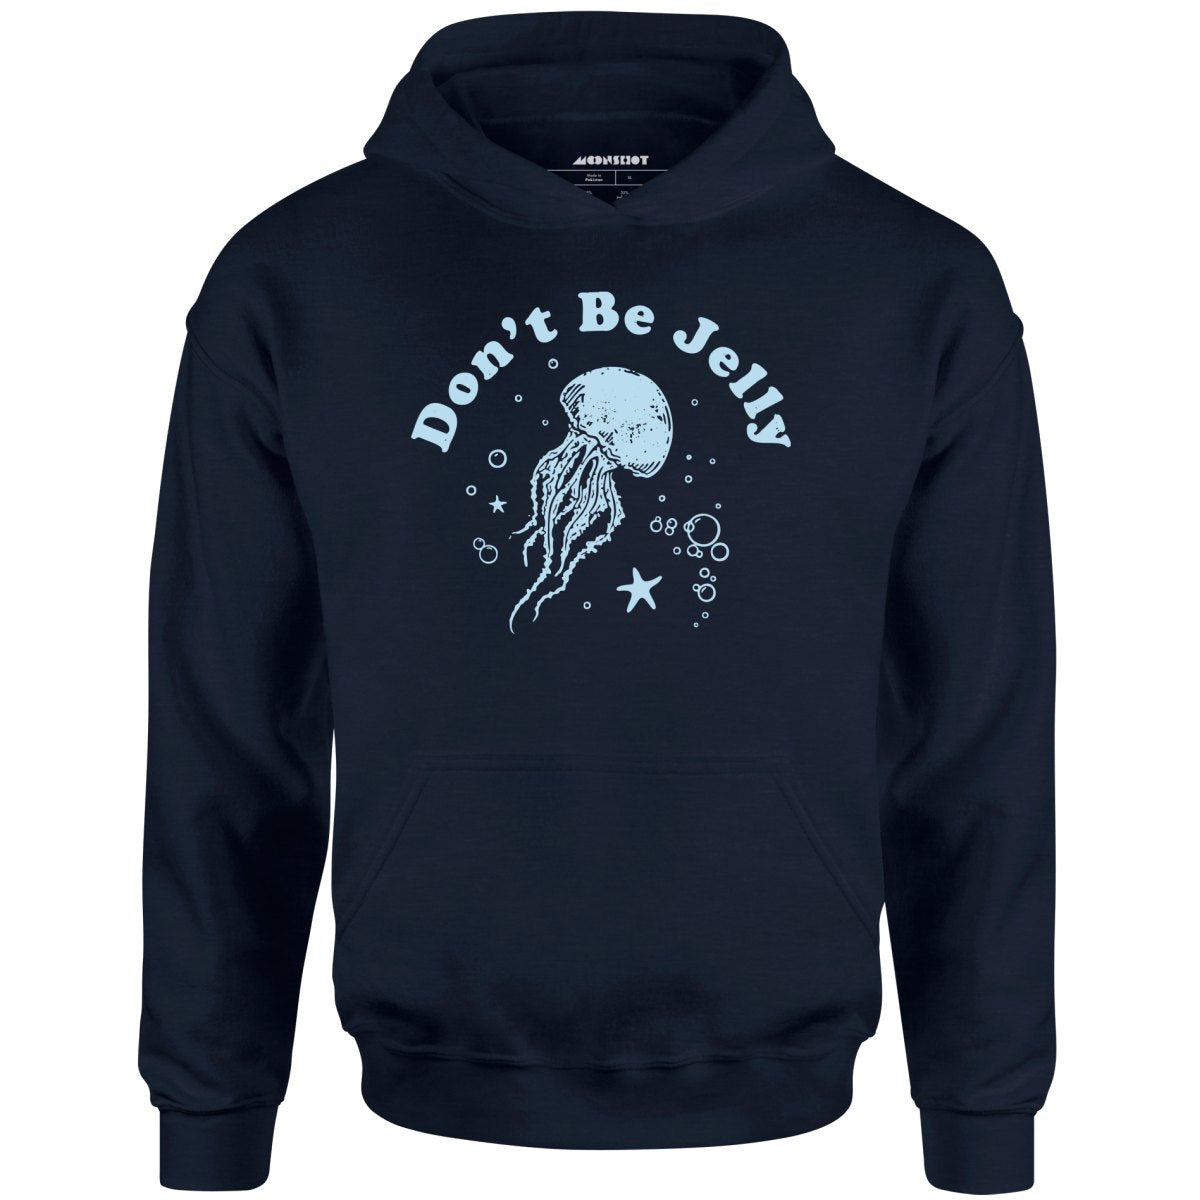 Don't Be Jelly - Unisex Hoodie